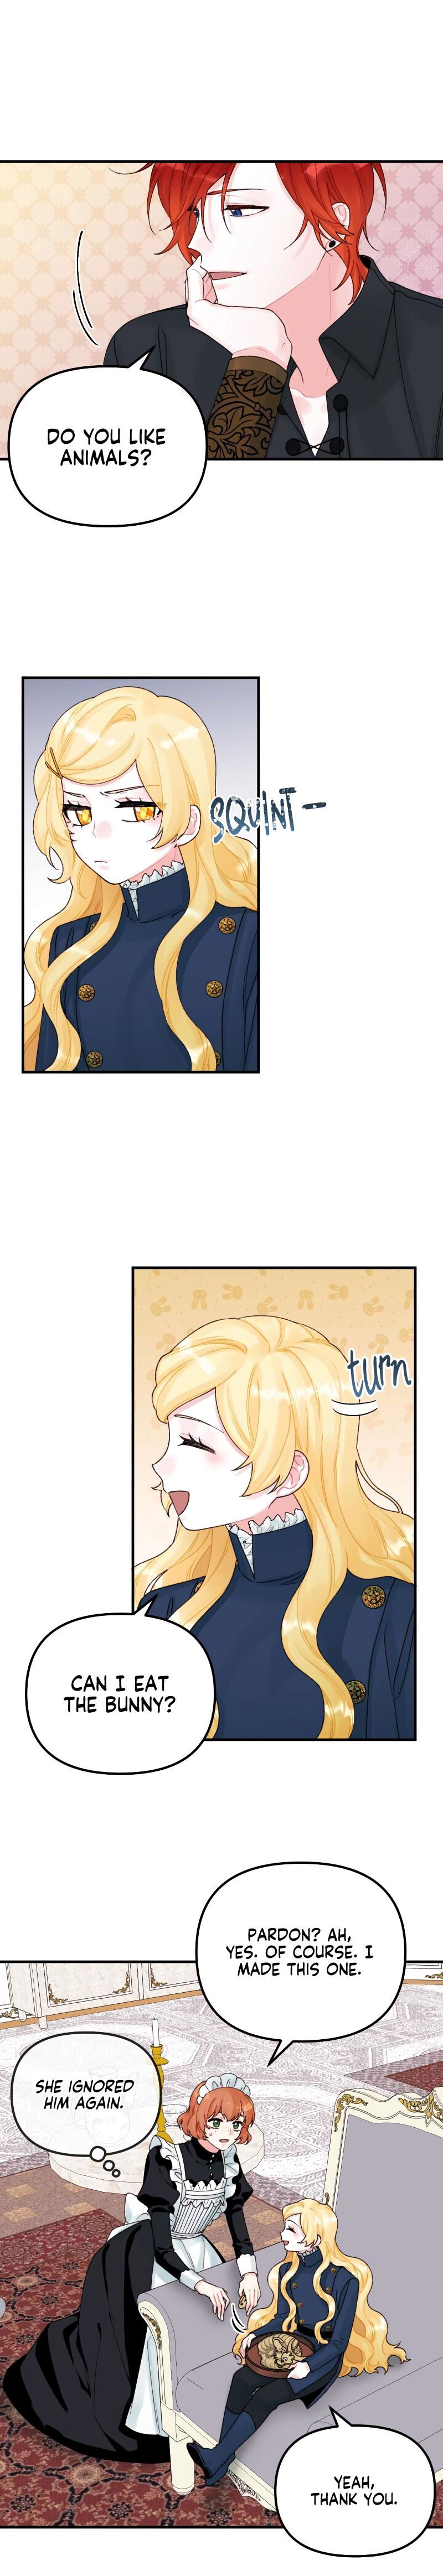 the-princess-in-the-dumpster-chap-33-5